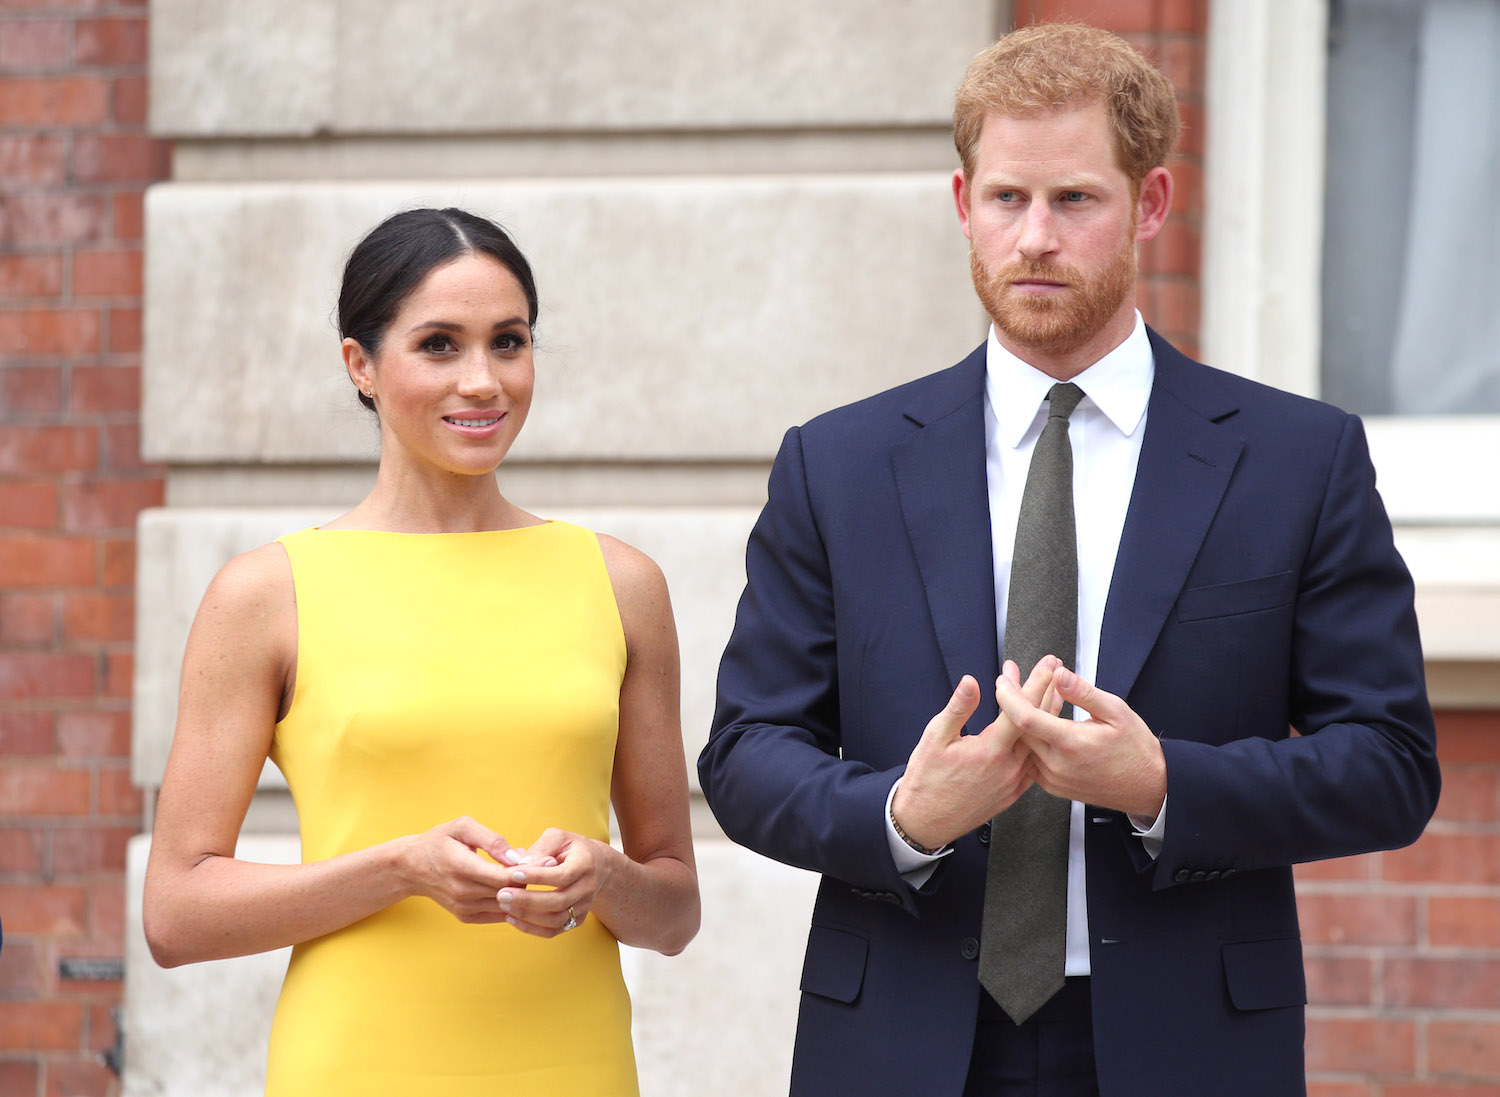 Meghan Markle and Prince Harry wearing a yellow dress and suit, respectively, during the Your Commonwealth Youth Challenge reception in 2018